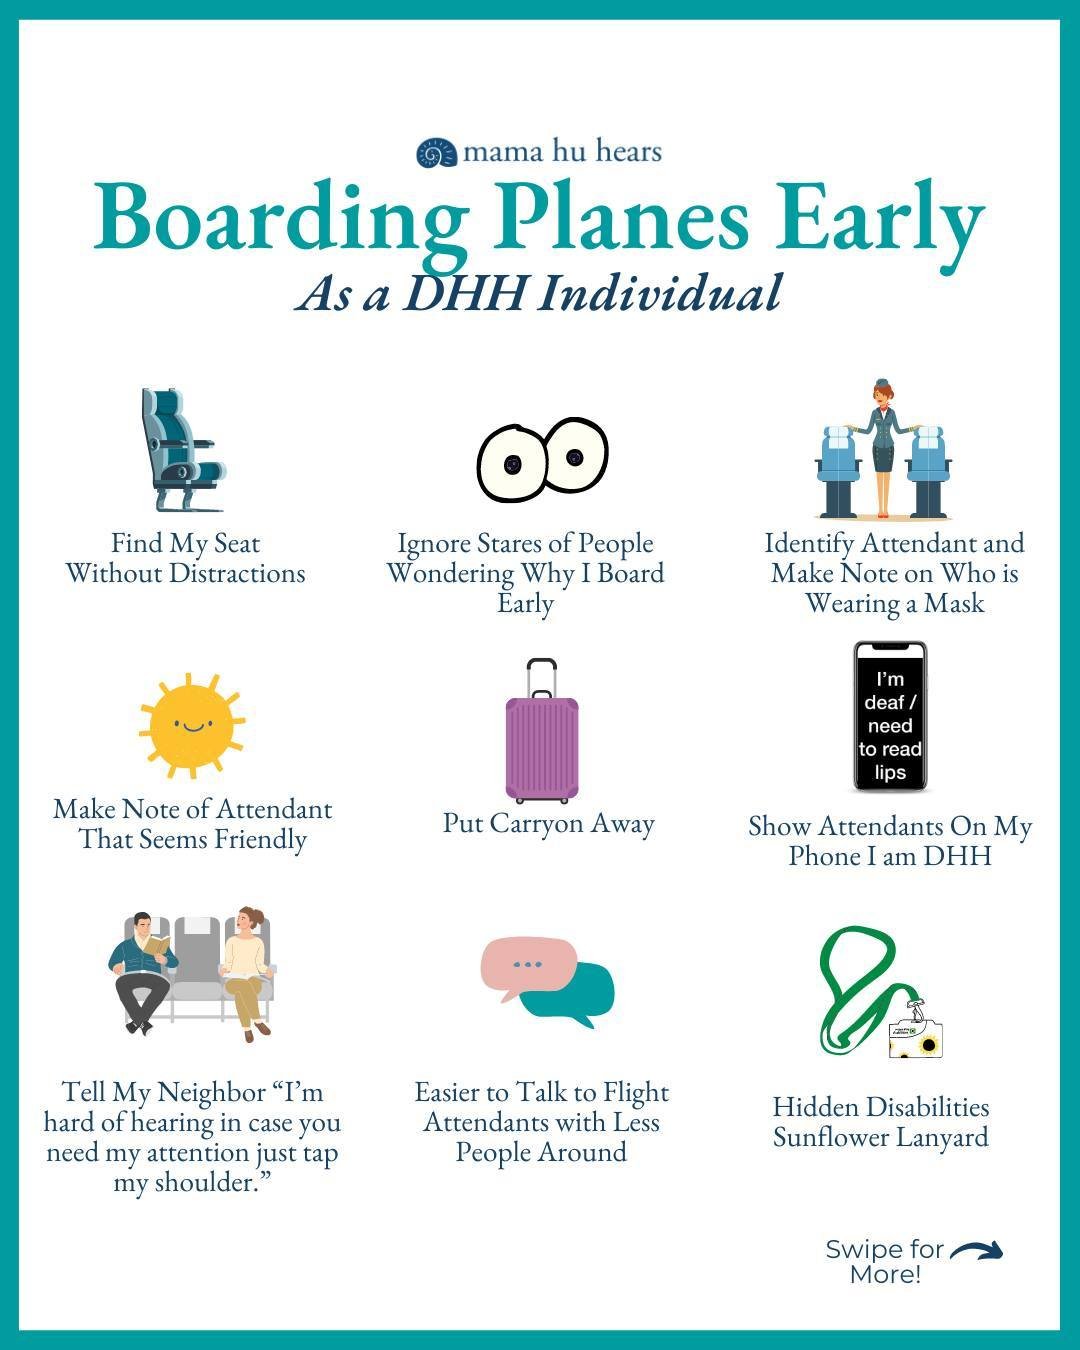 I travel a lot for speaking engagements and I've figured out the best process for navigating an airport and boarding planes. I am usually the youngest person in line for priority boarding without kids. It used to make me self-conscious - but I've rea